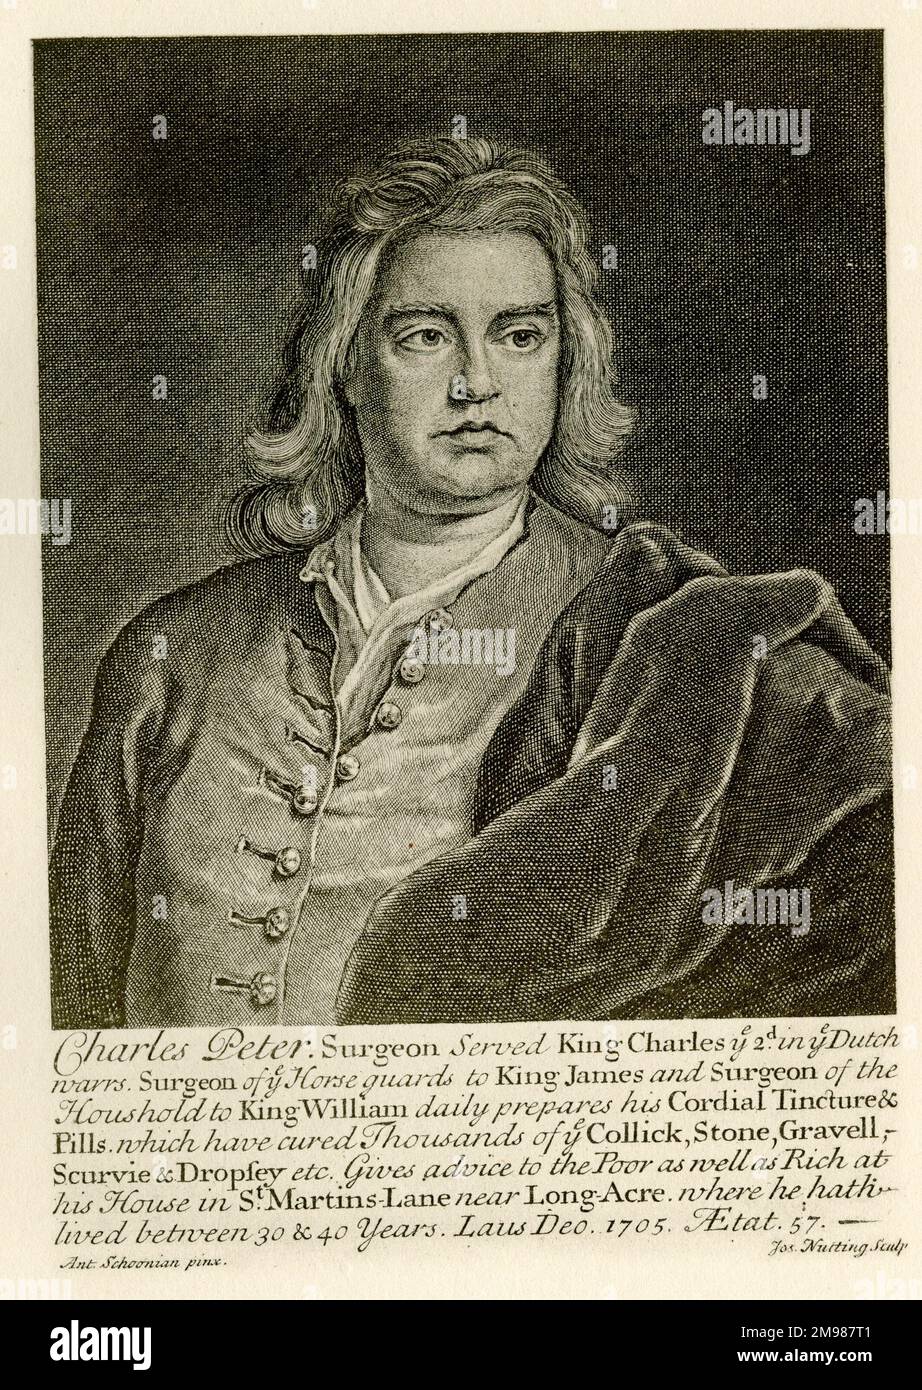 London Trade Card - Charles Peter (c.1648-17??), Surgeon to King Charles II in the Dutch Wars, Surgeon of the Horseguards to King James II and Surgeon of the Household to King William. Based at his house in St Martin's Lane near Long Acre. Seen here at the age of 57. Stock Photo